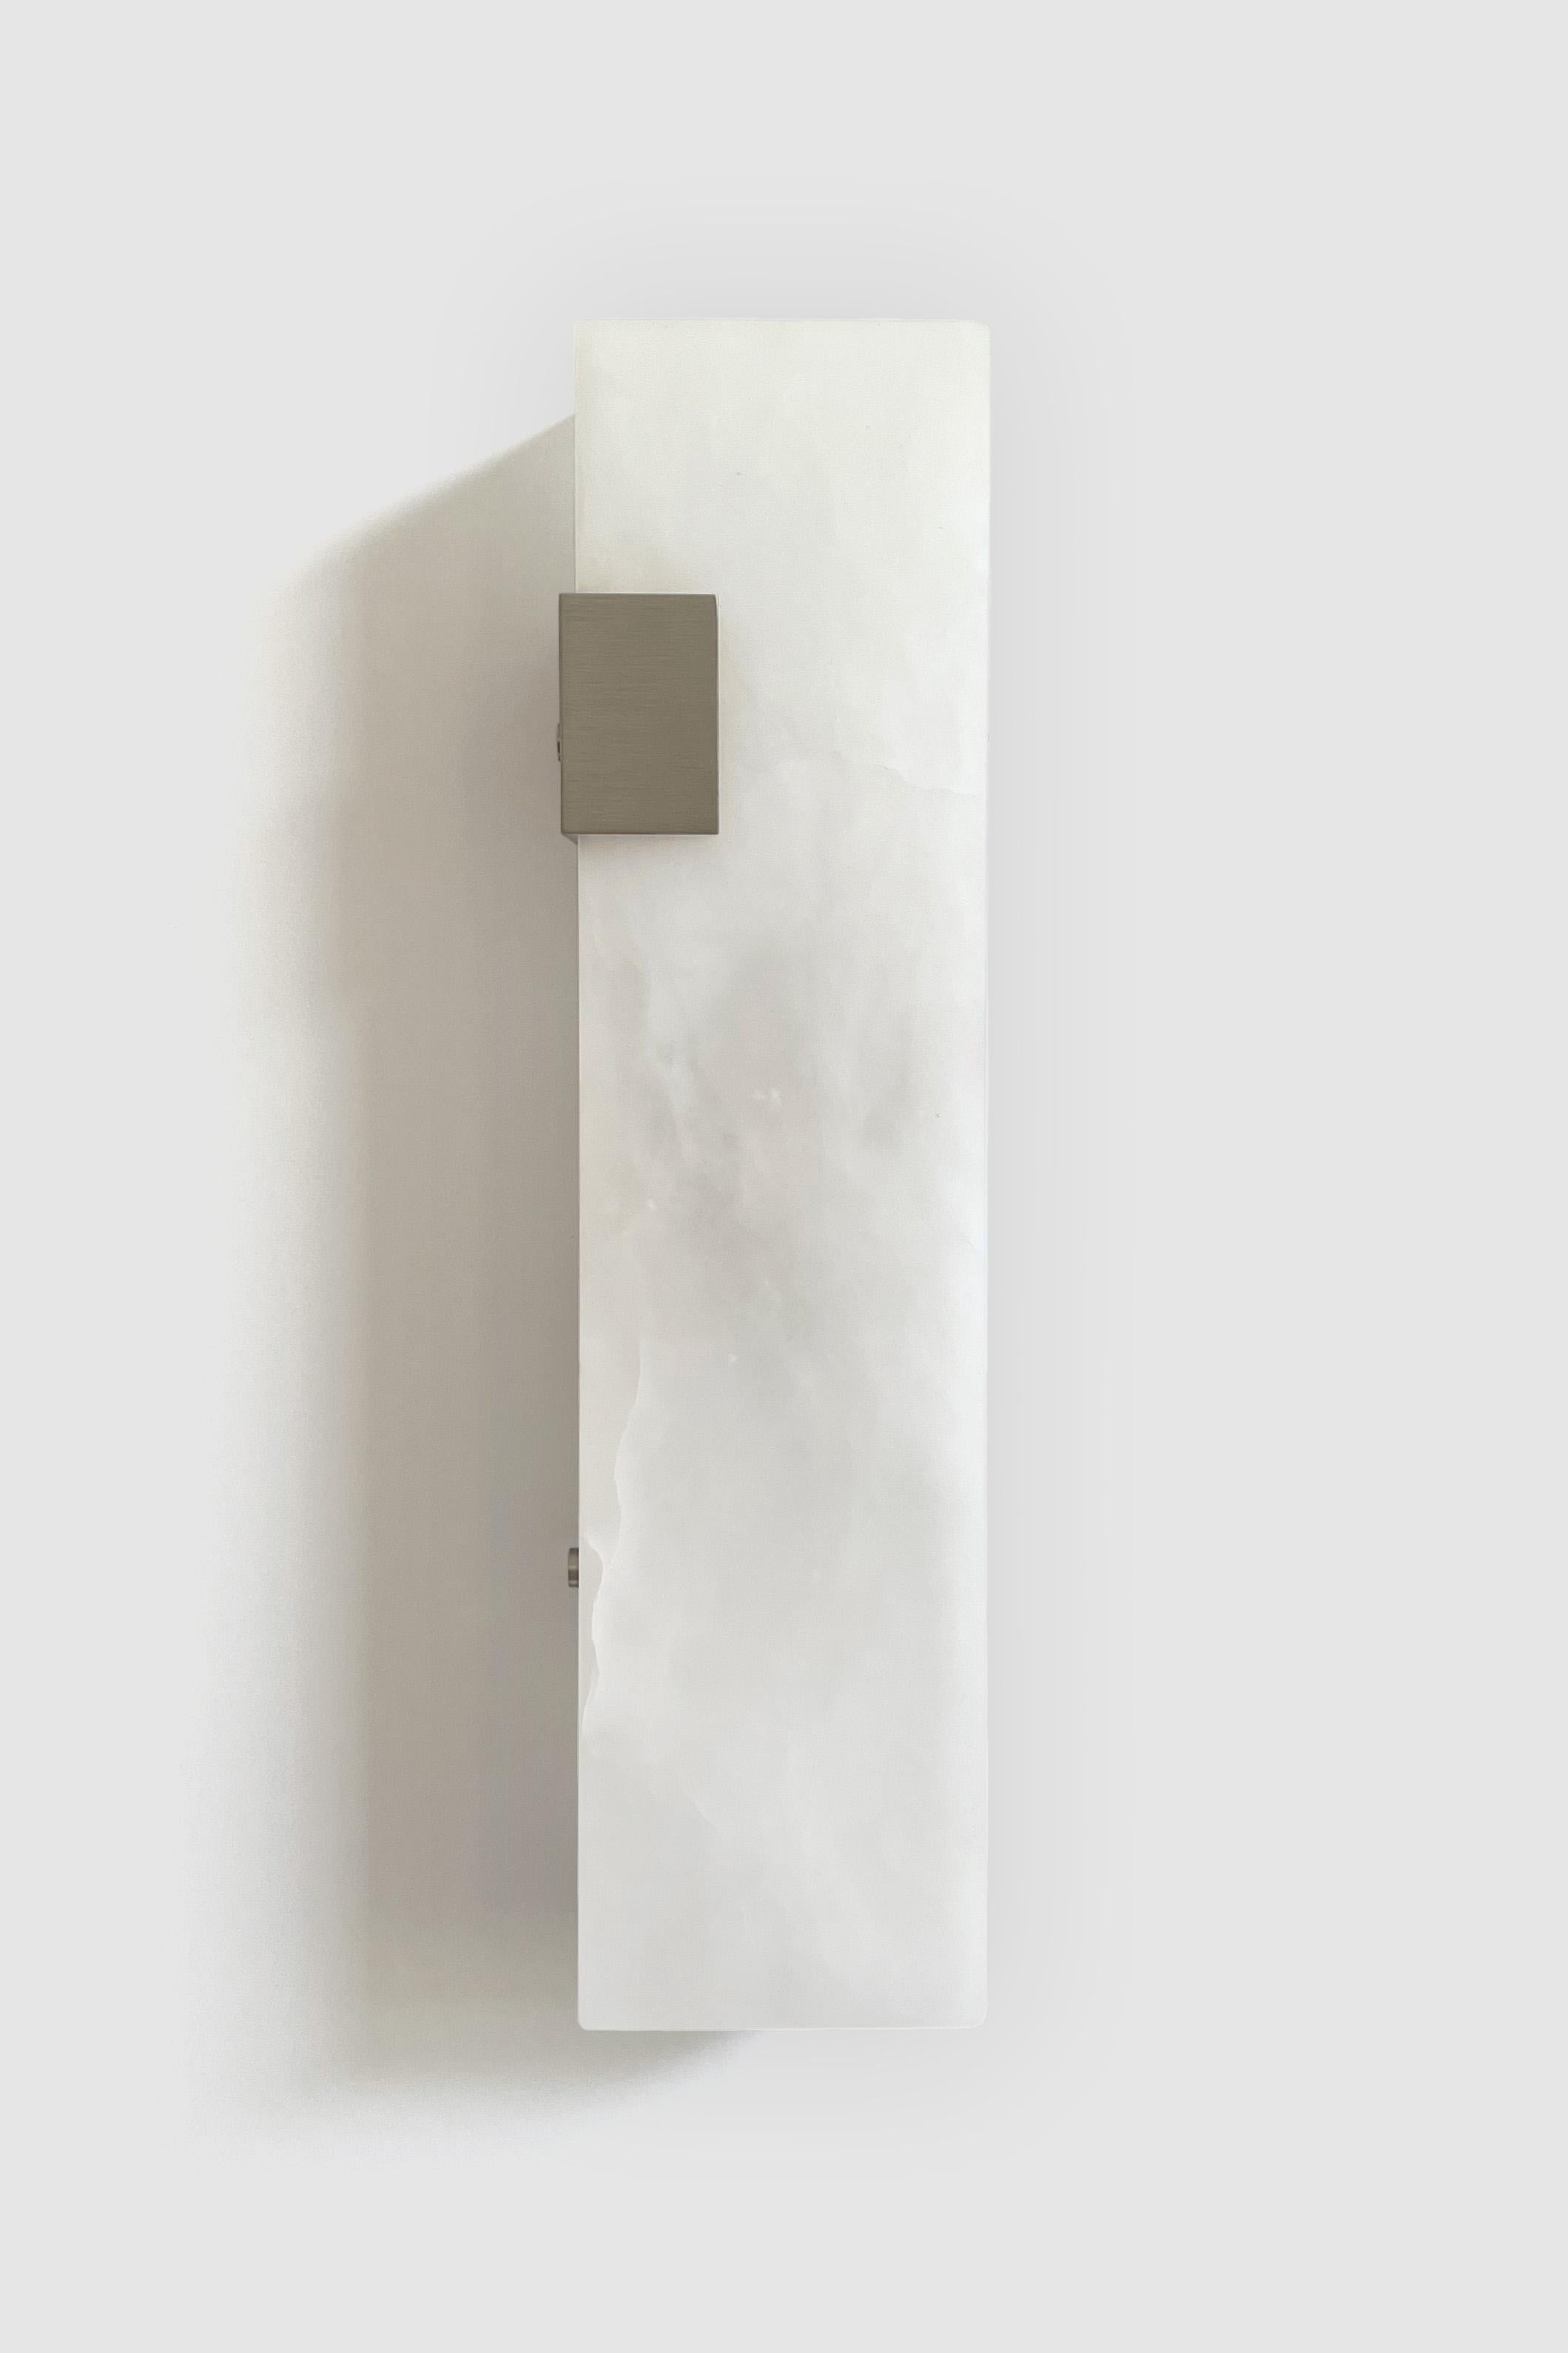 Orphan Work 003-1C Sconce
Shown in brushed nickel and alabaster 
Available in brushed brass, brushed nickel and blackened brass
Measures: 19” H x 5 1/4” W x 3 7/8” D
Wall or ceiling mount
Vertical or horizontal
Plug-in by request
1-4 adjustable